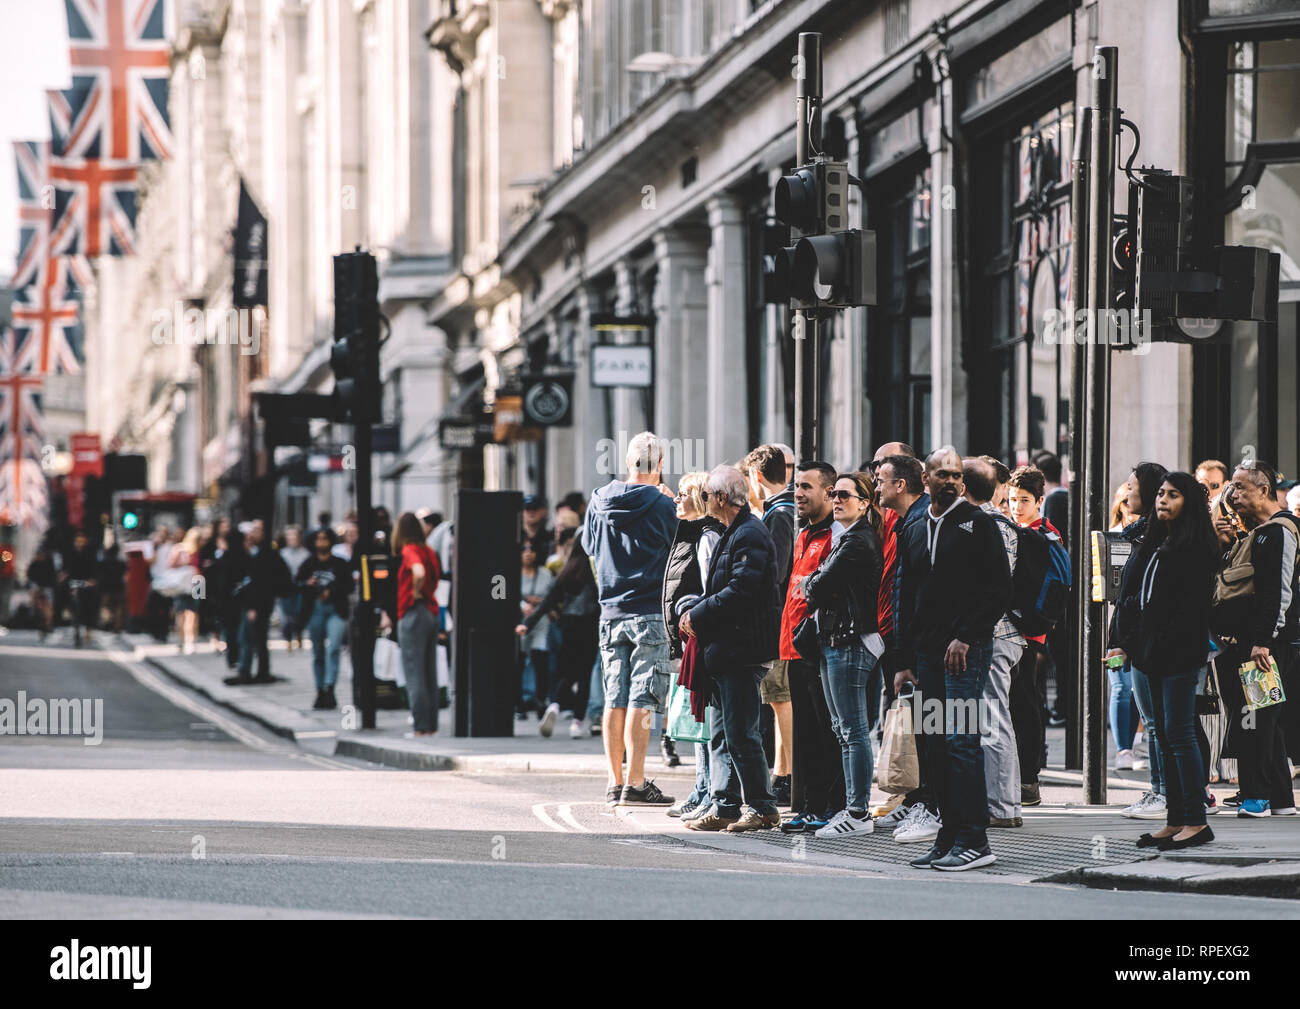 LONDON, UNITED KINGDOM - MAY 18, 2018: Pedestrians waiting to cross the Regent Street in London on a warm spring day  Stock Photo